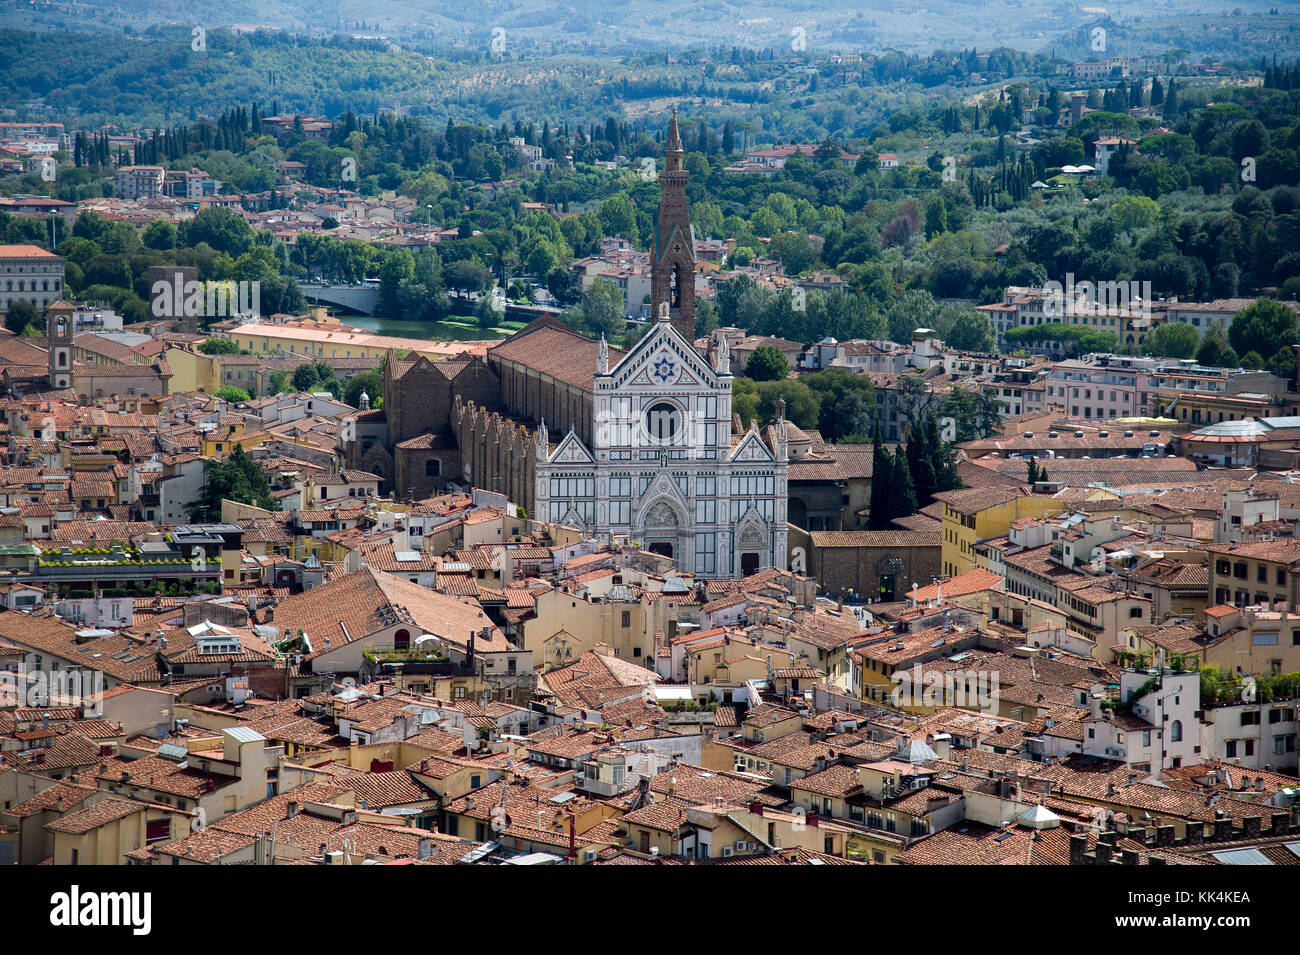 Italian Gothic Basilica di Santa Croce (Basilica of the Holy Cross) in Historic Centre of Firenze listed World Heritage by UNESCO. Firenze, Tuscany, I Stock Photo